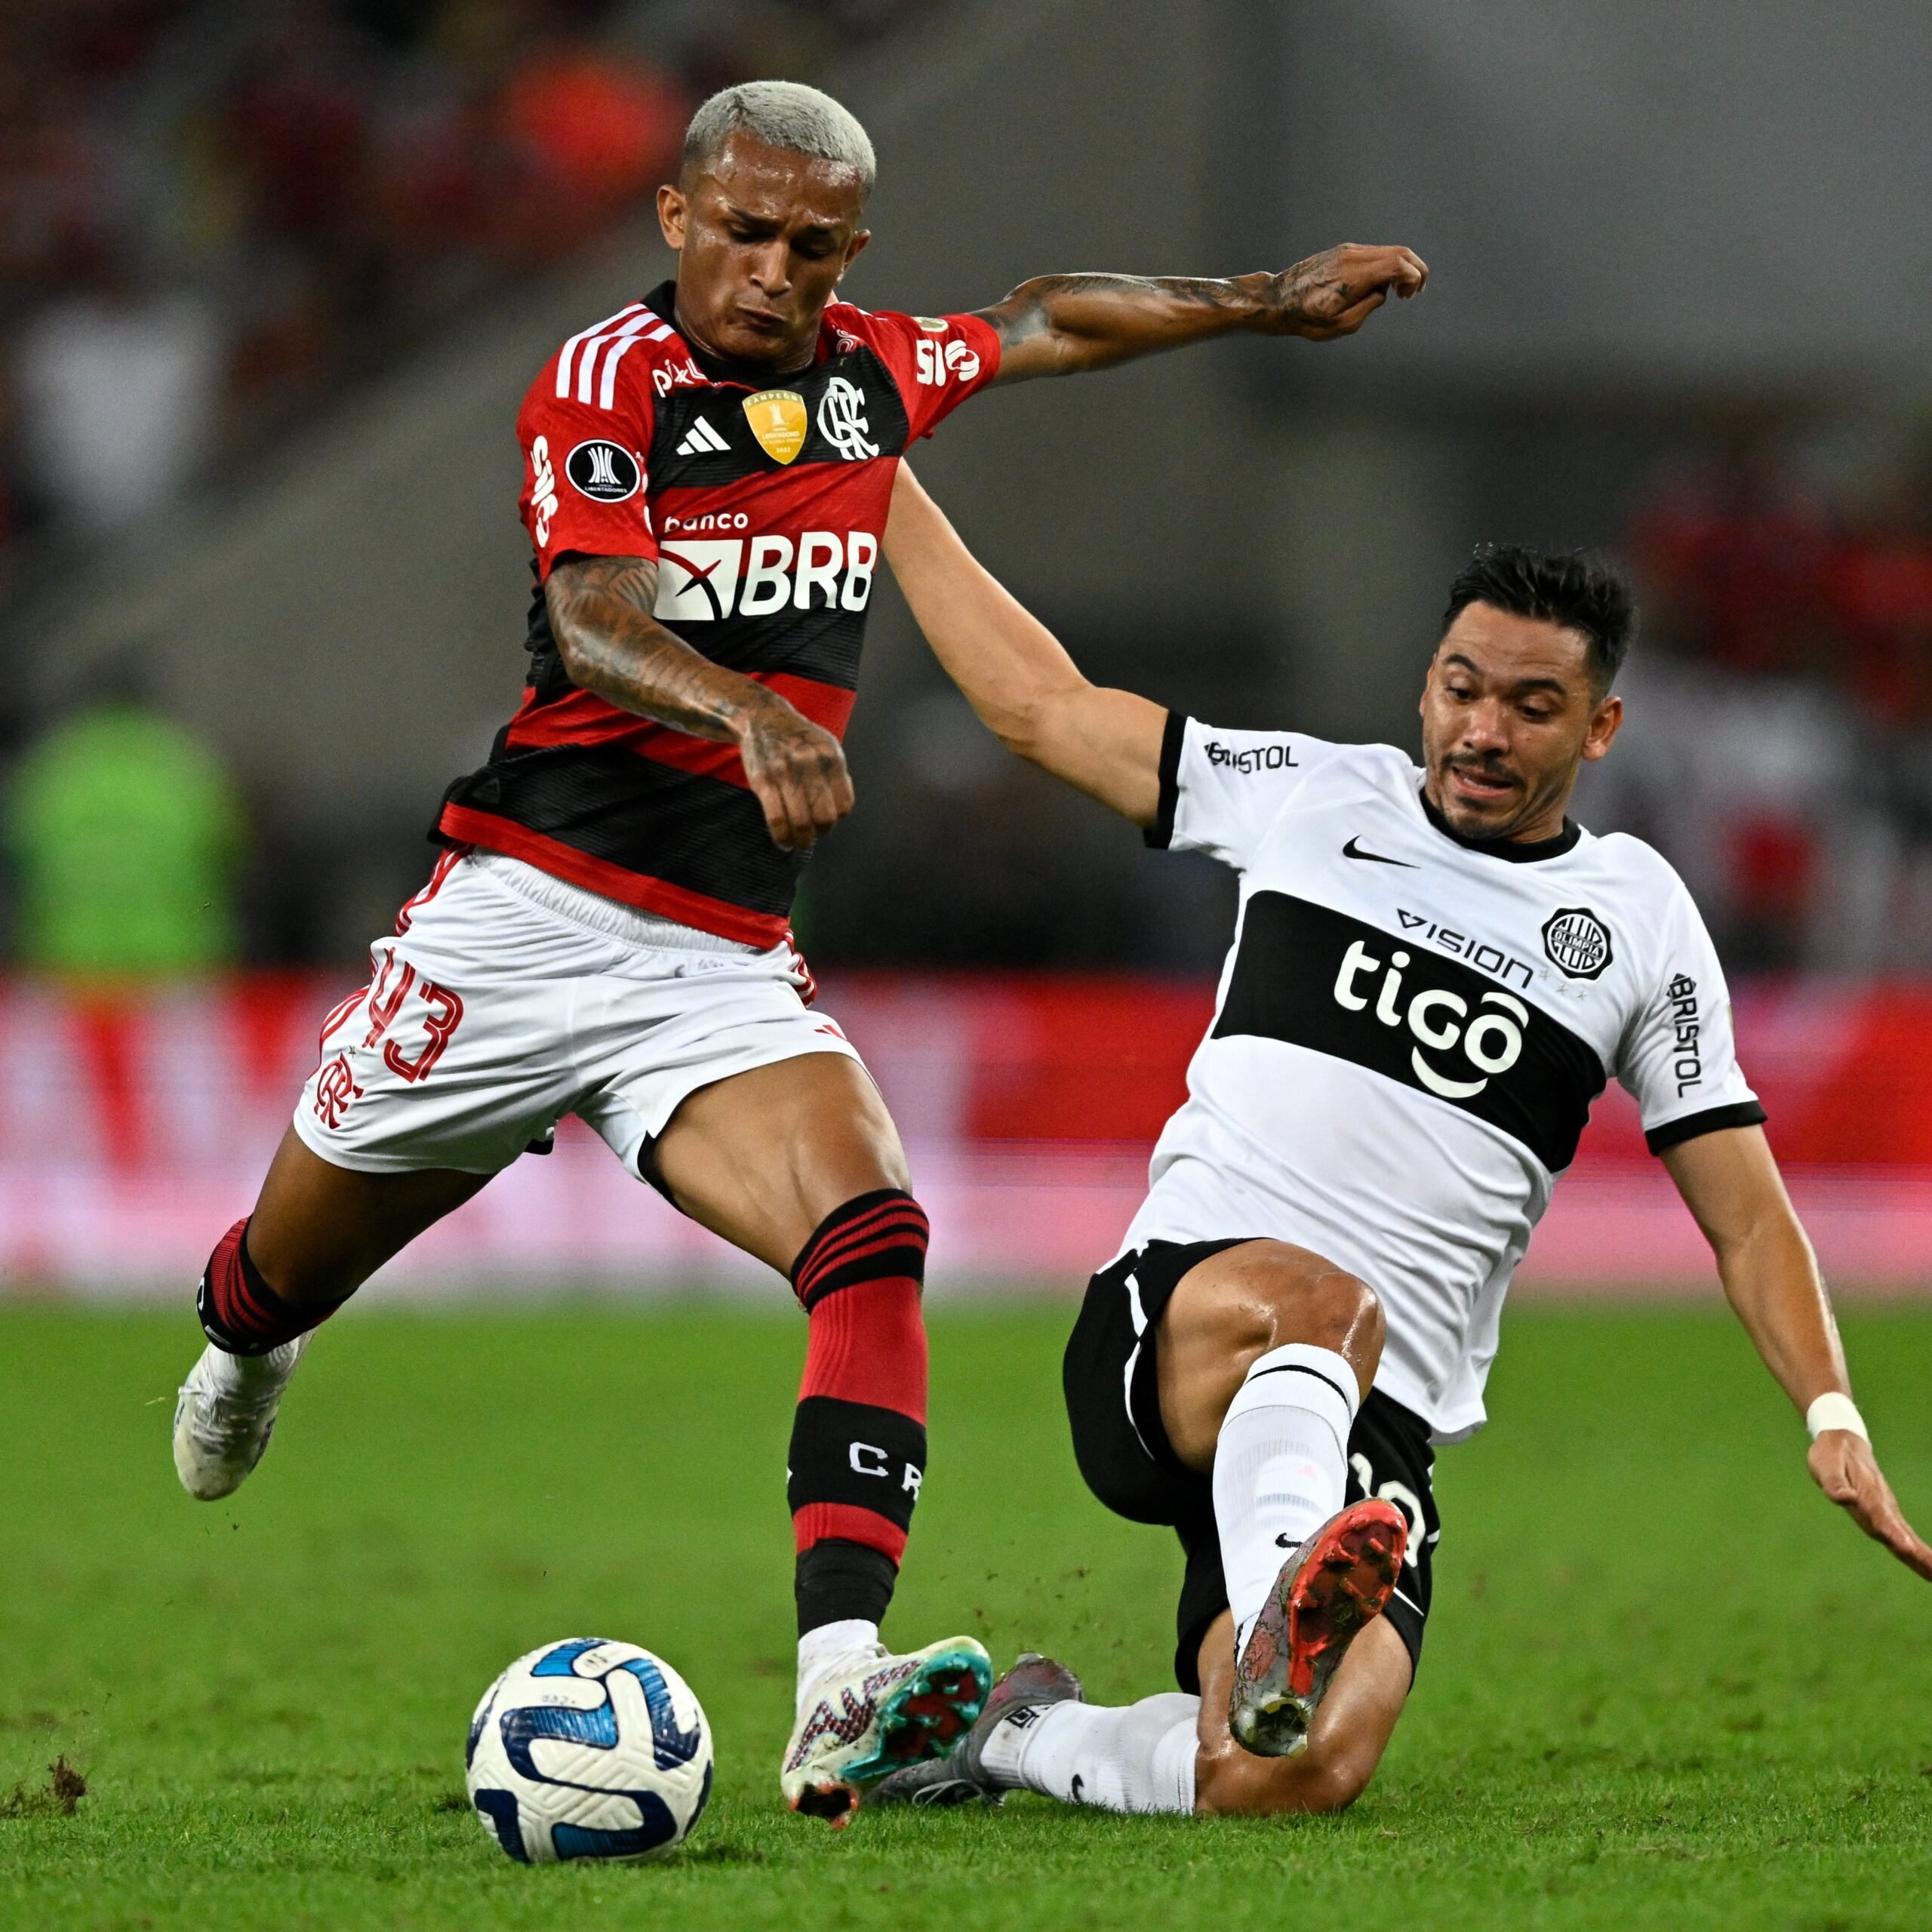 Wesley and Lucas Silva of Cruzeiro and Gerson of Flamengo fight